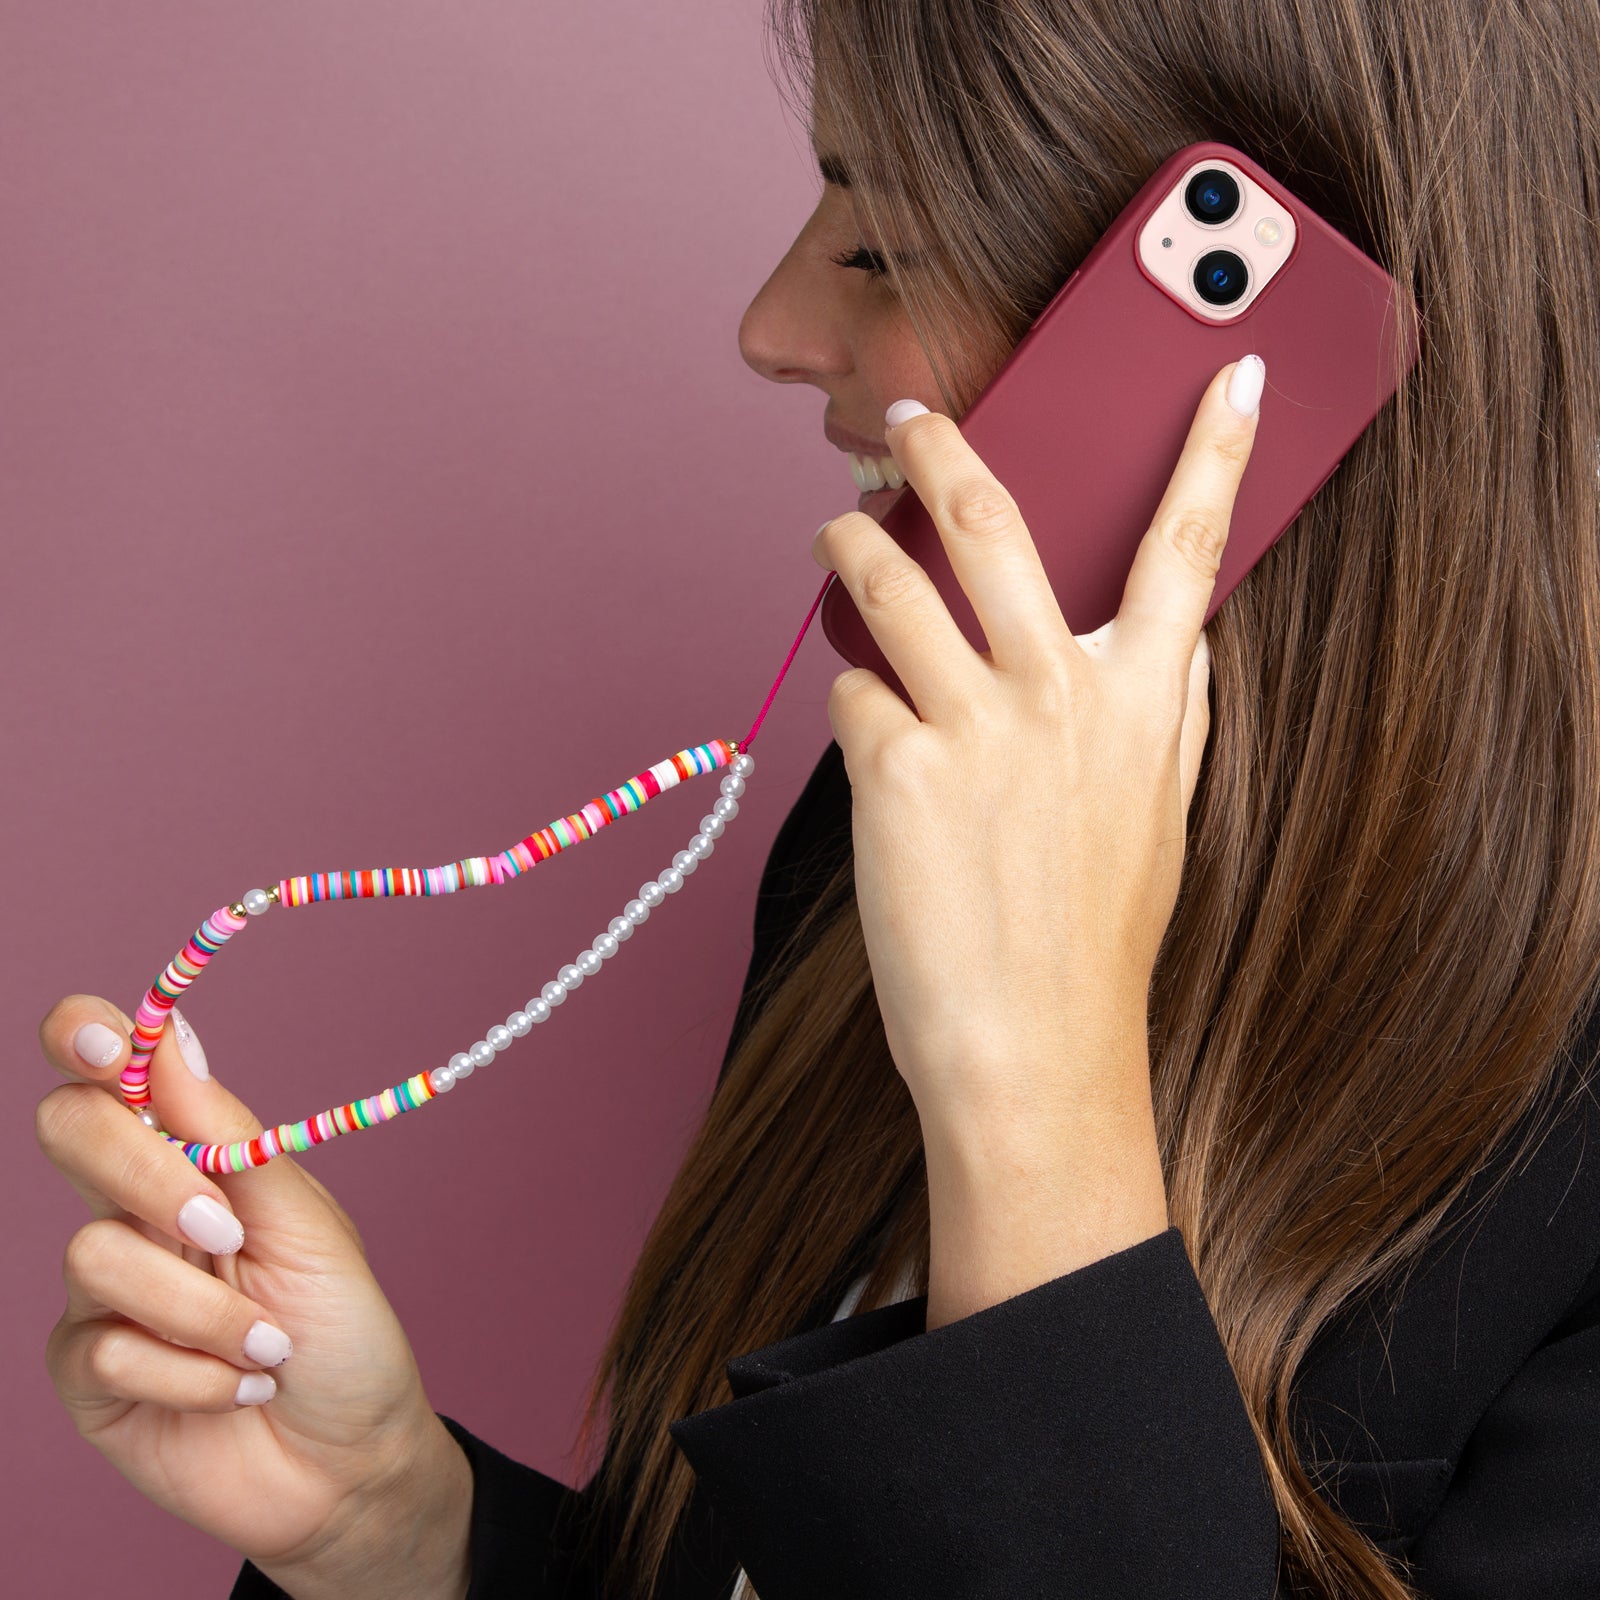 Beads - Beaded smartphone charm strap | case&me